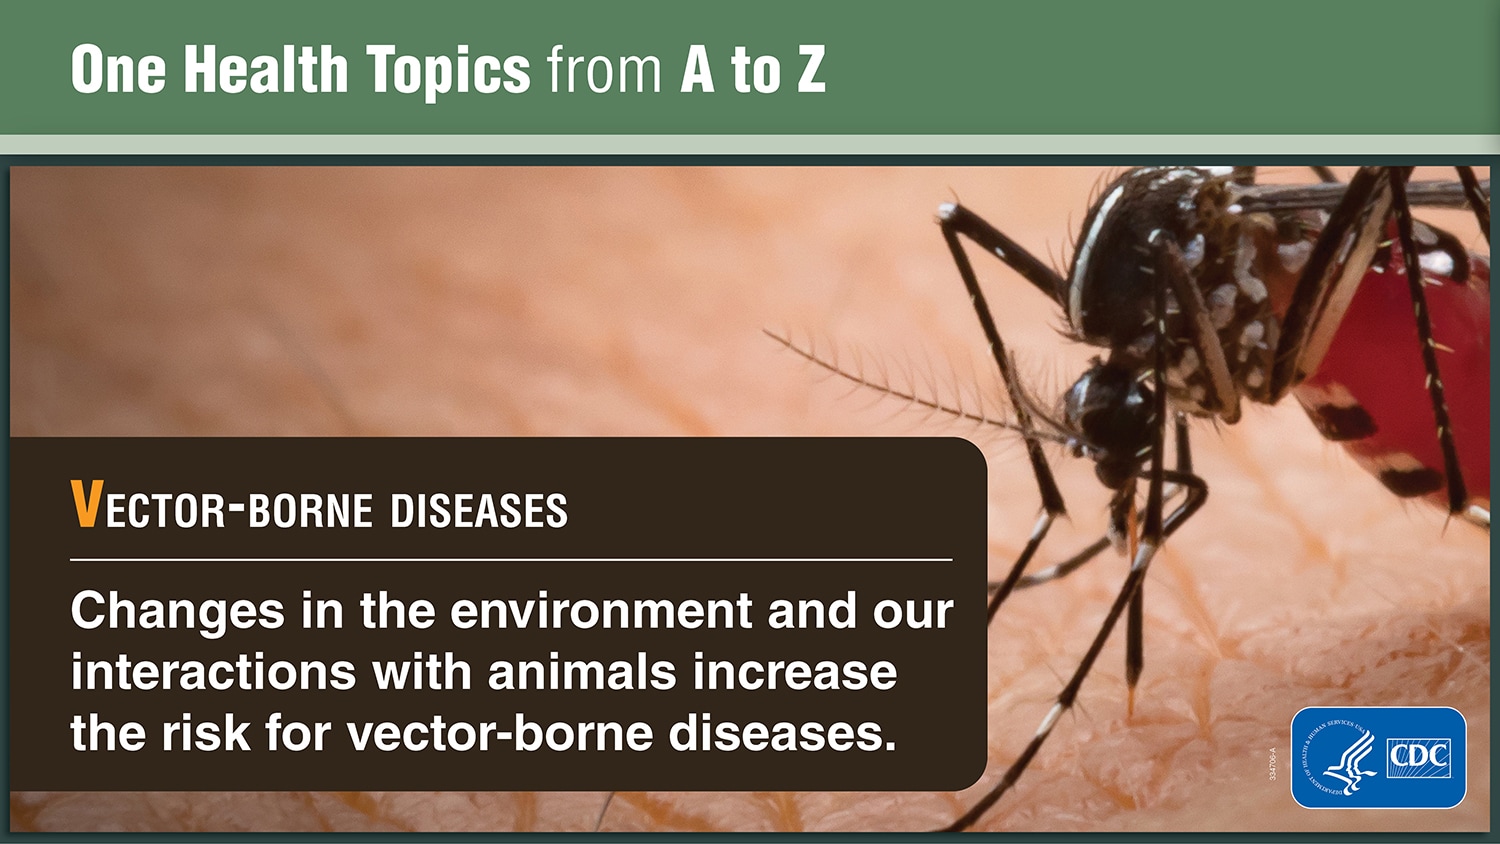 One Health Topics from A to Z explaining Vector-borne Diseases